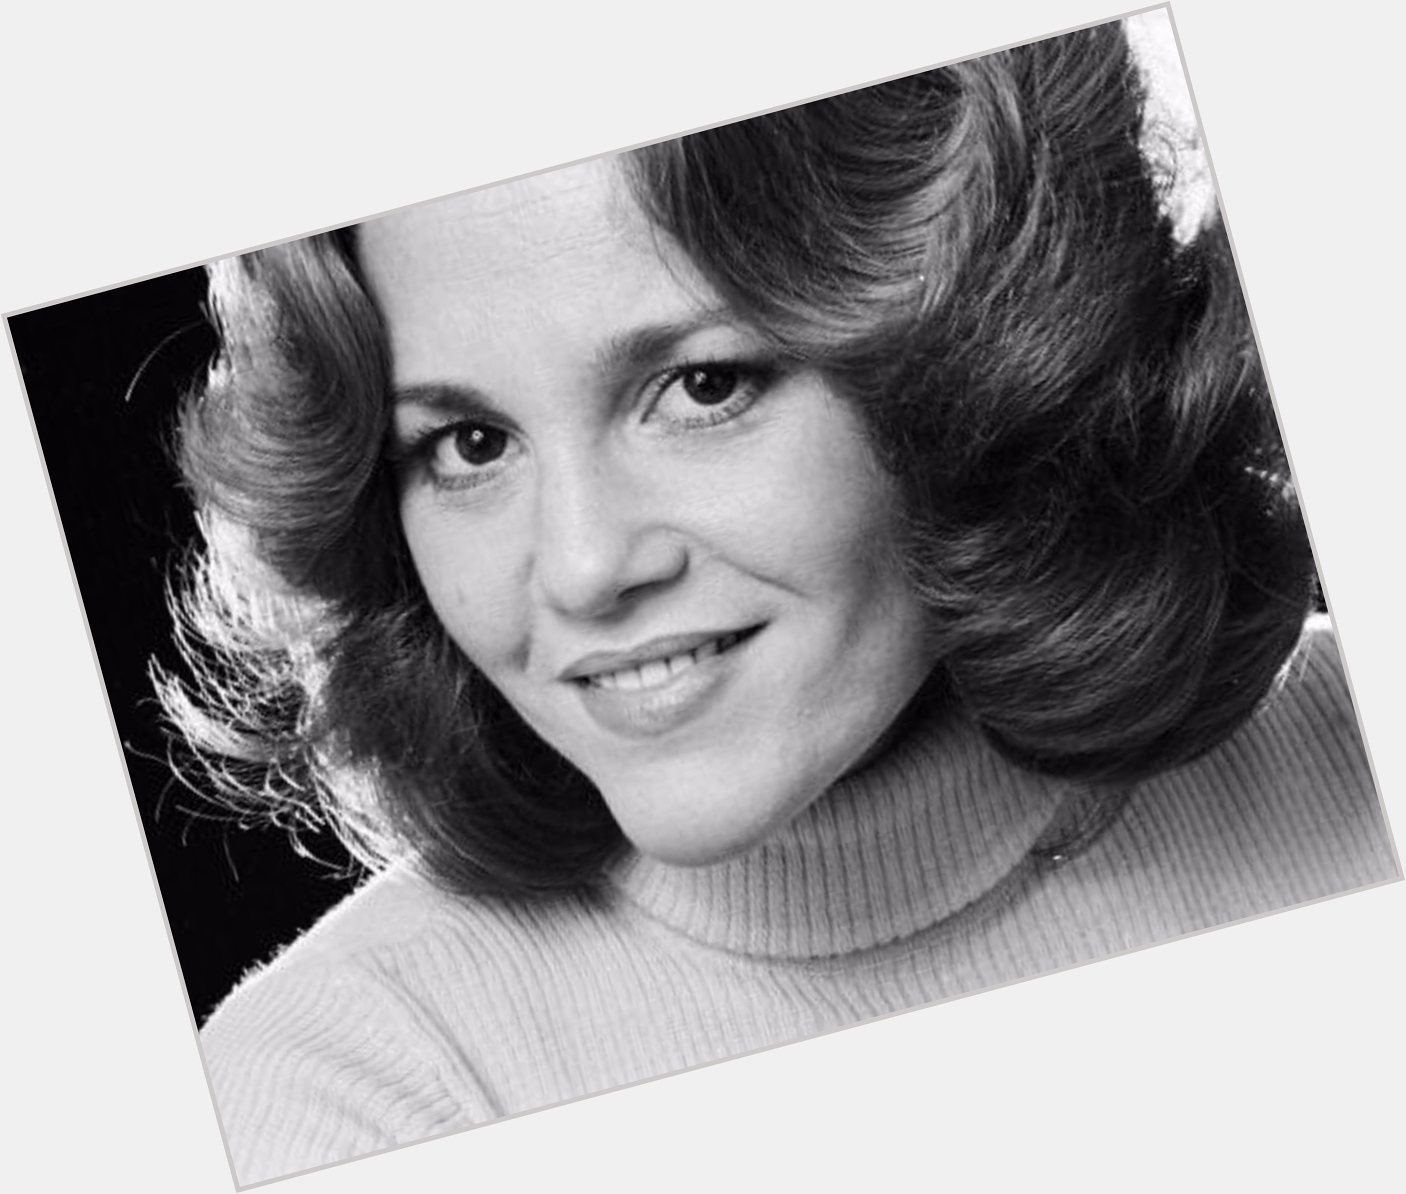 Happy Birthday to Madeline Kahn, a real angel who left us way too soon. 